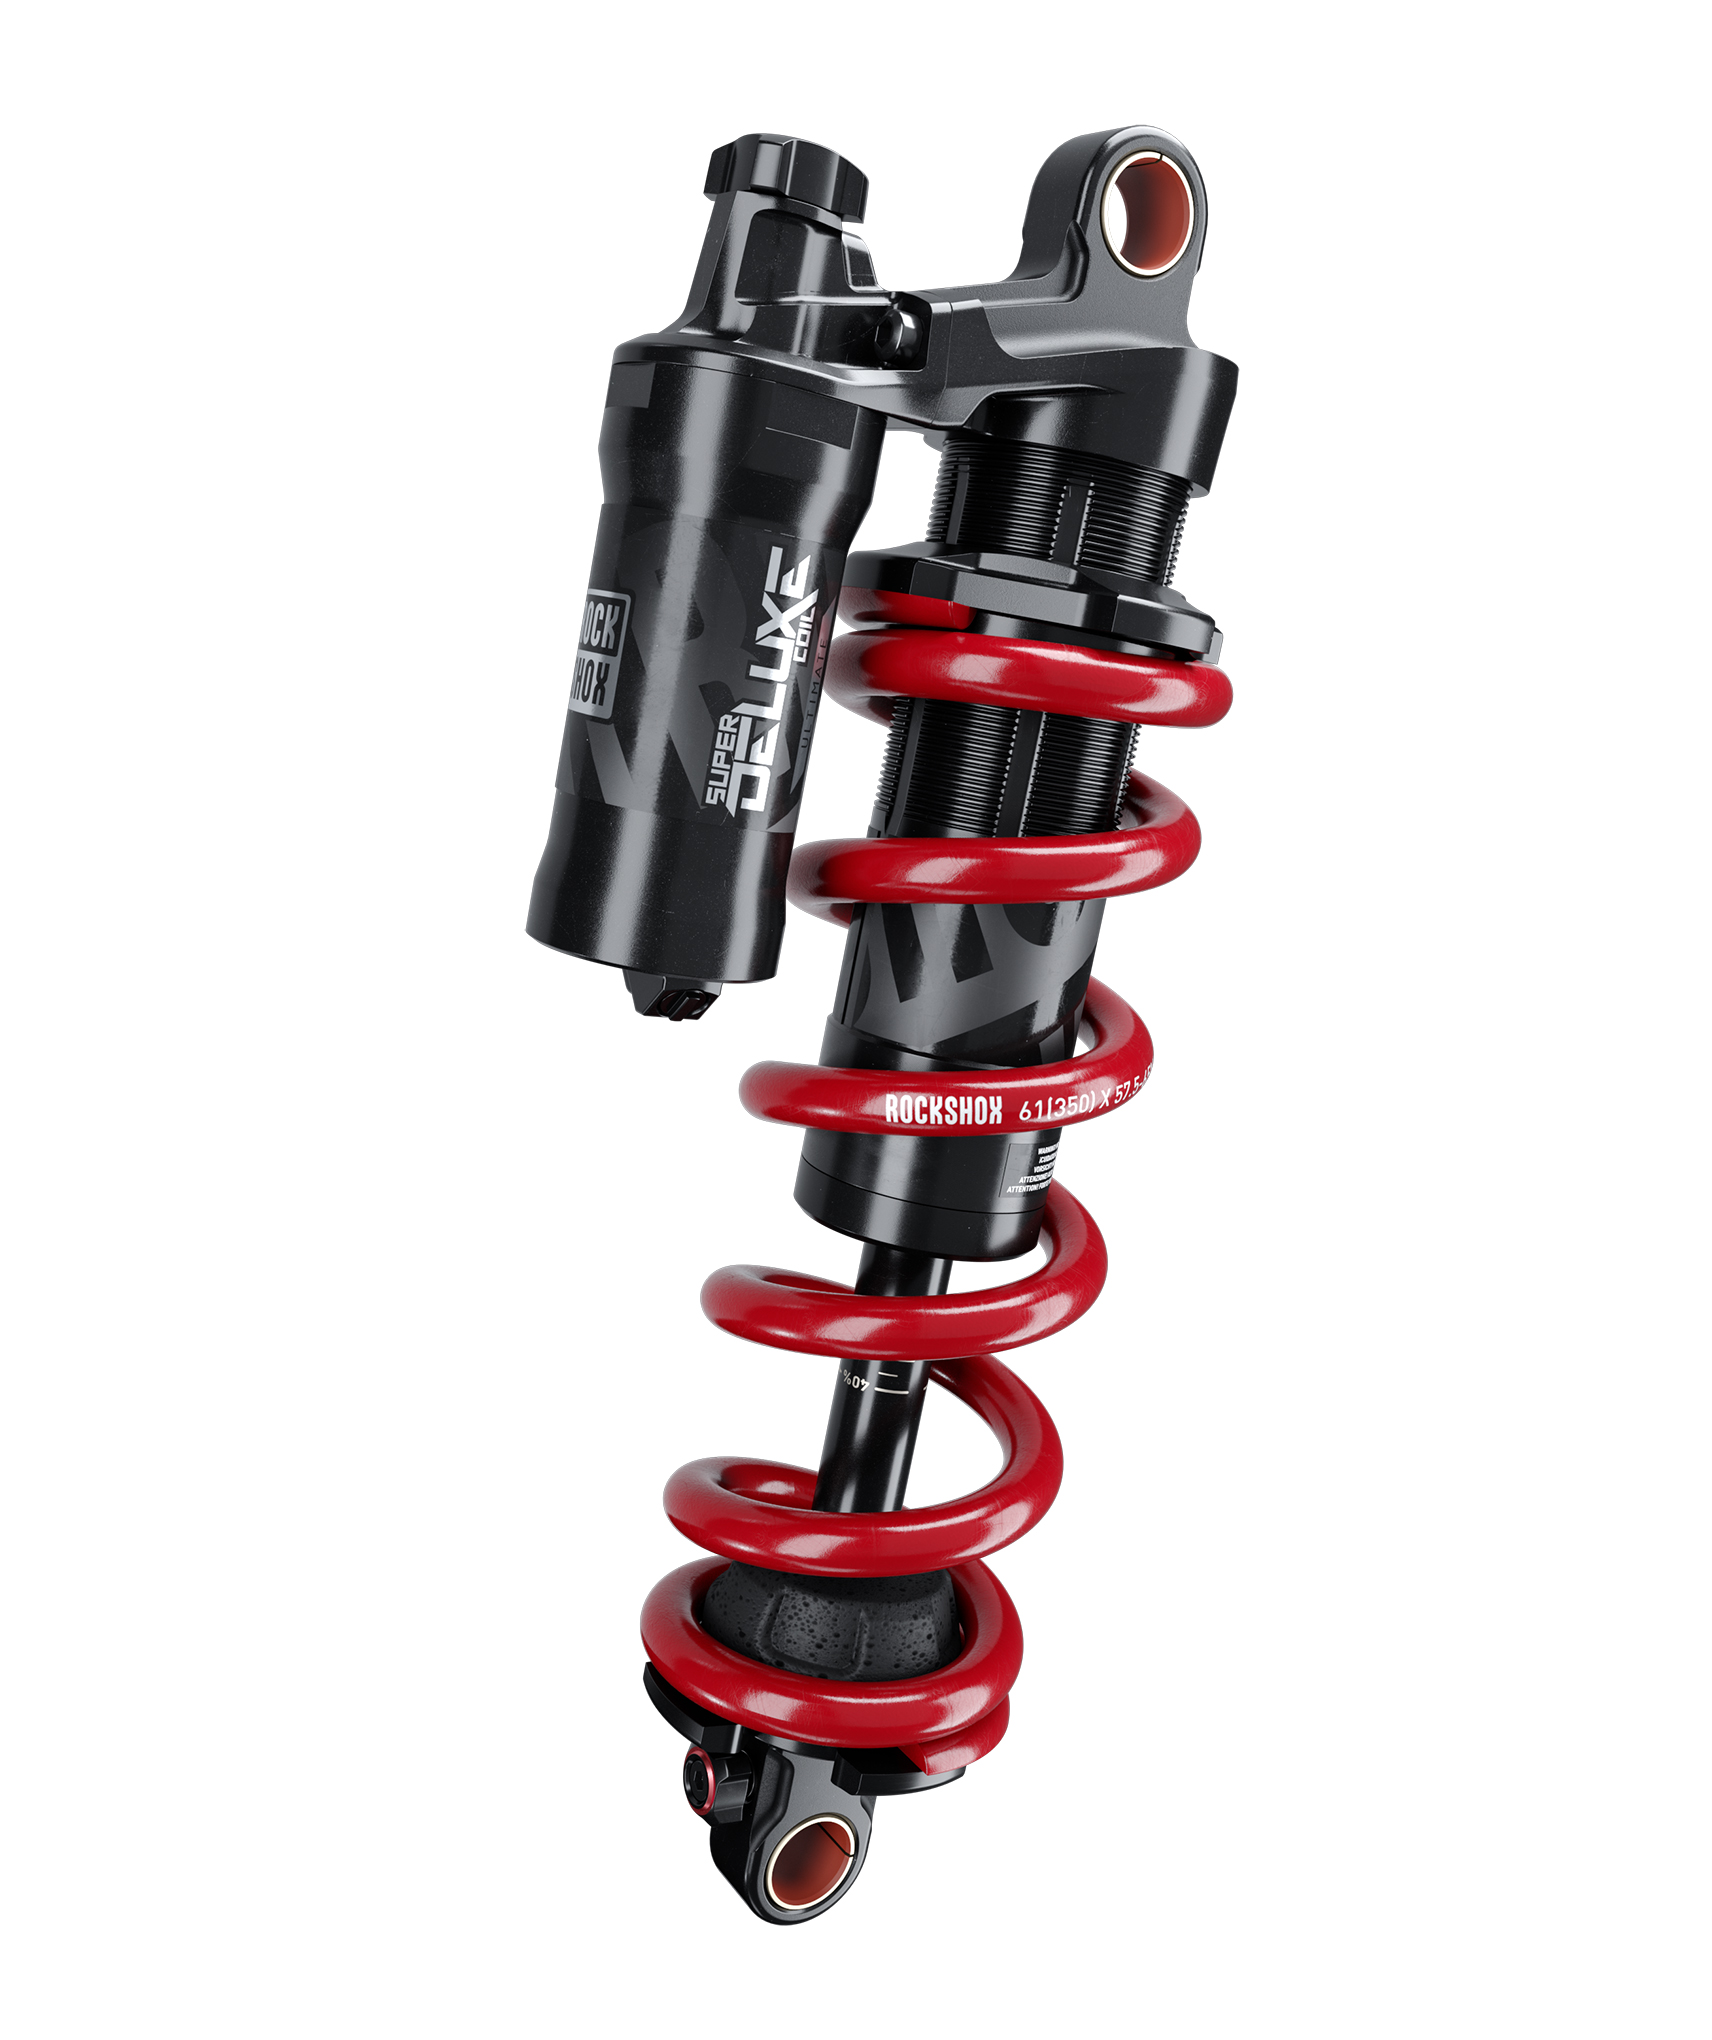 160mm coil shock